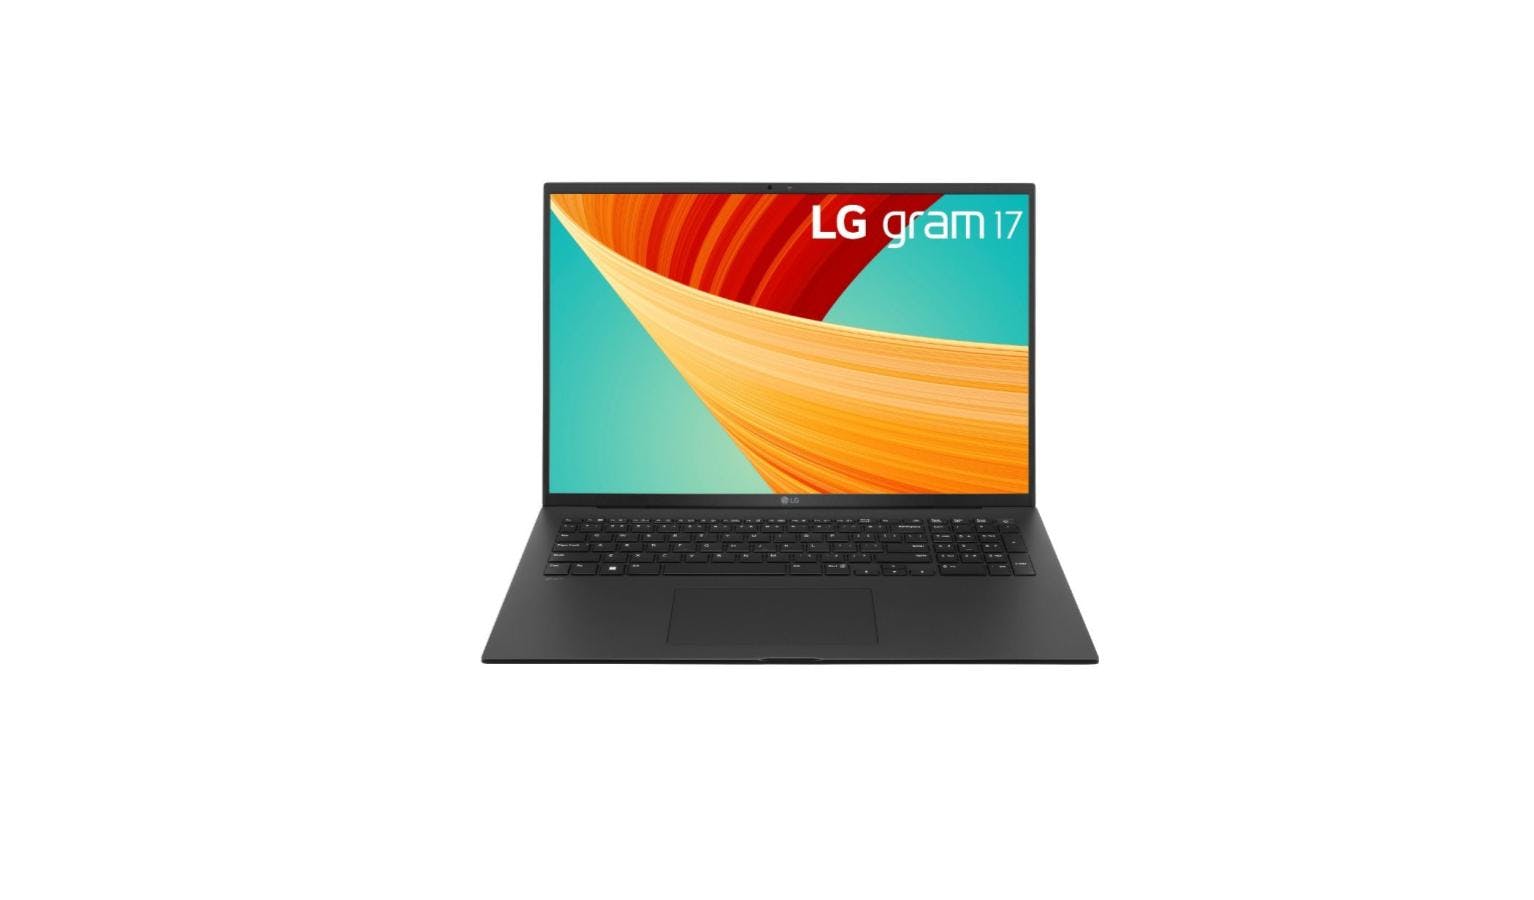 The new LG Gram 17: a high performance but too flexible